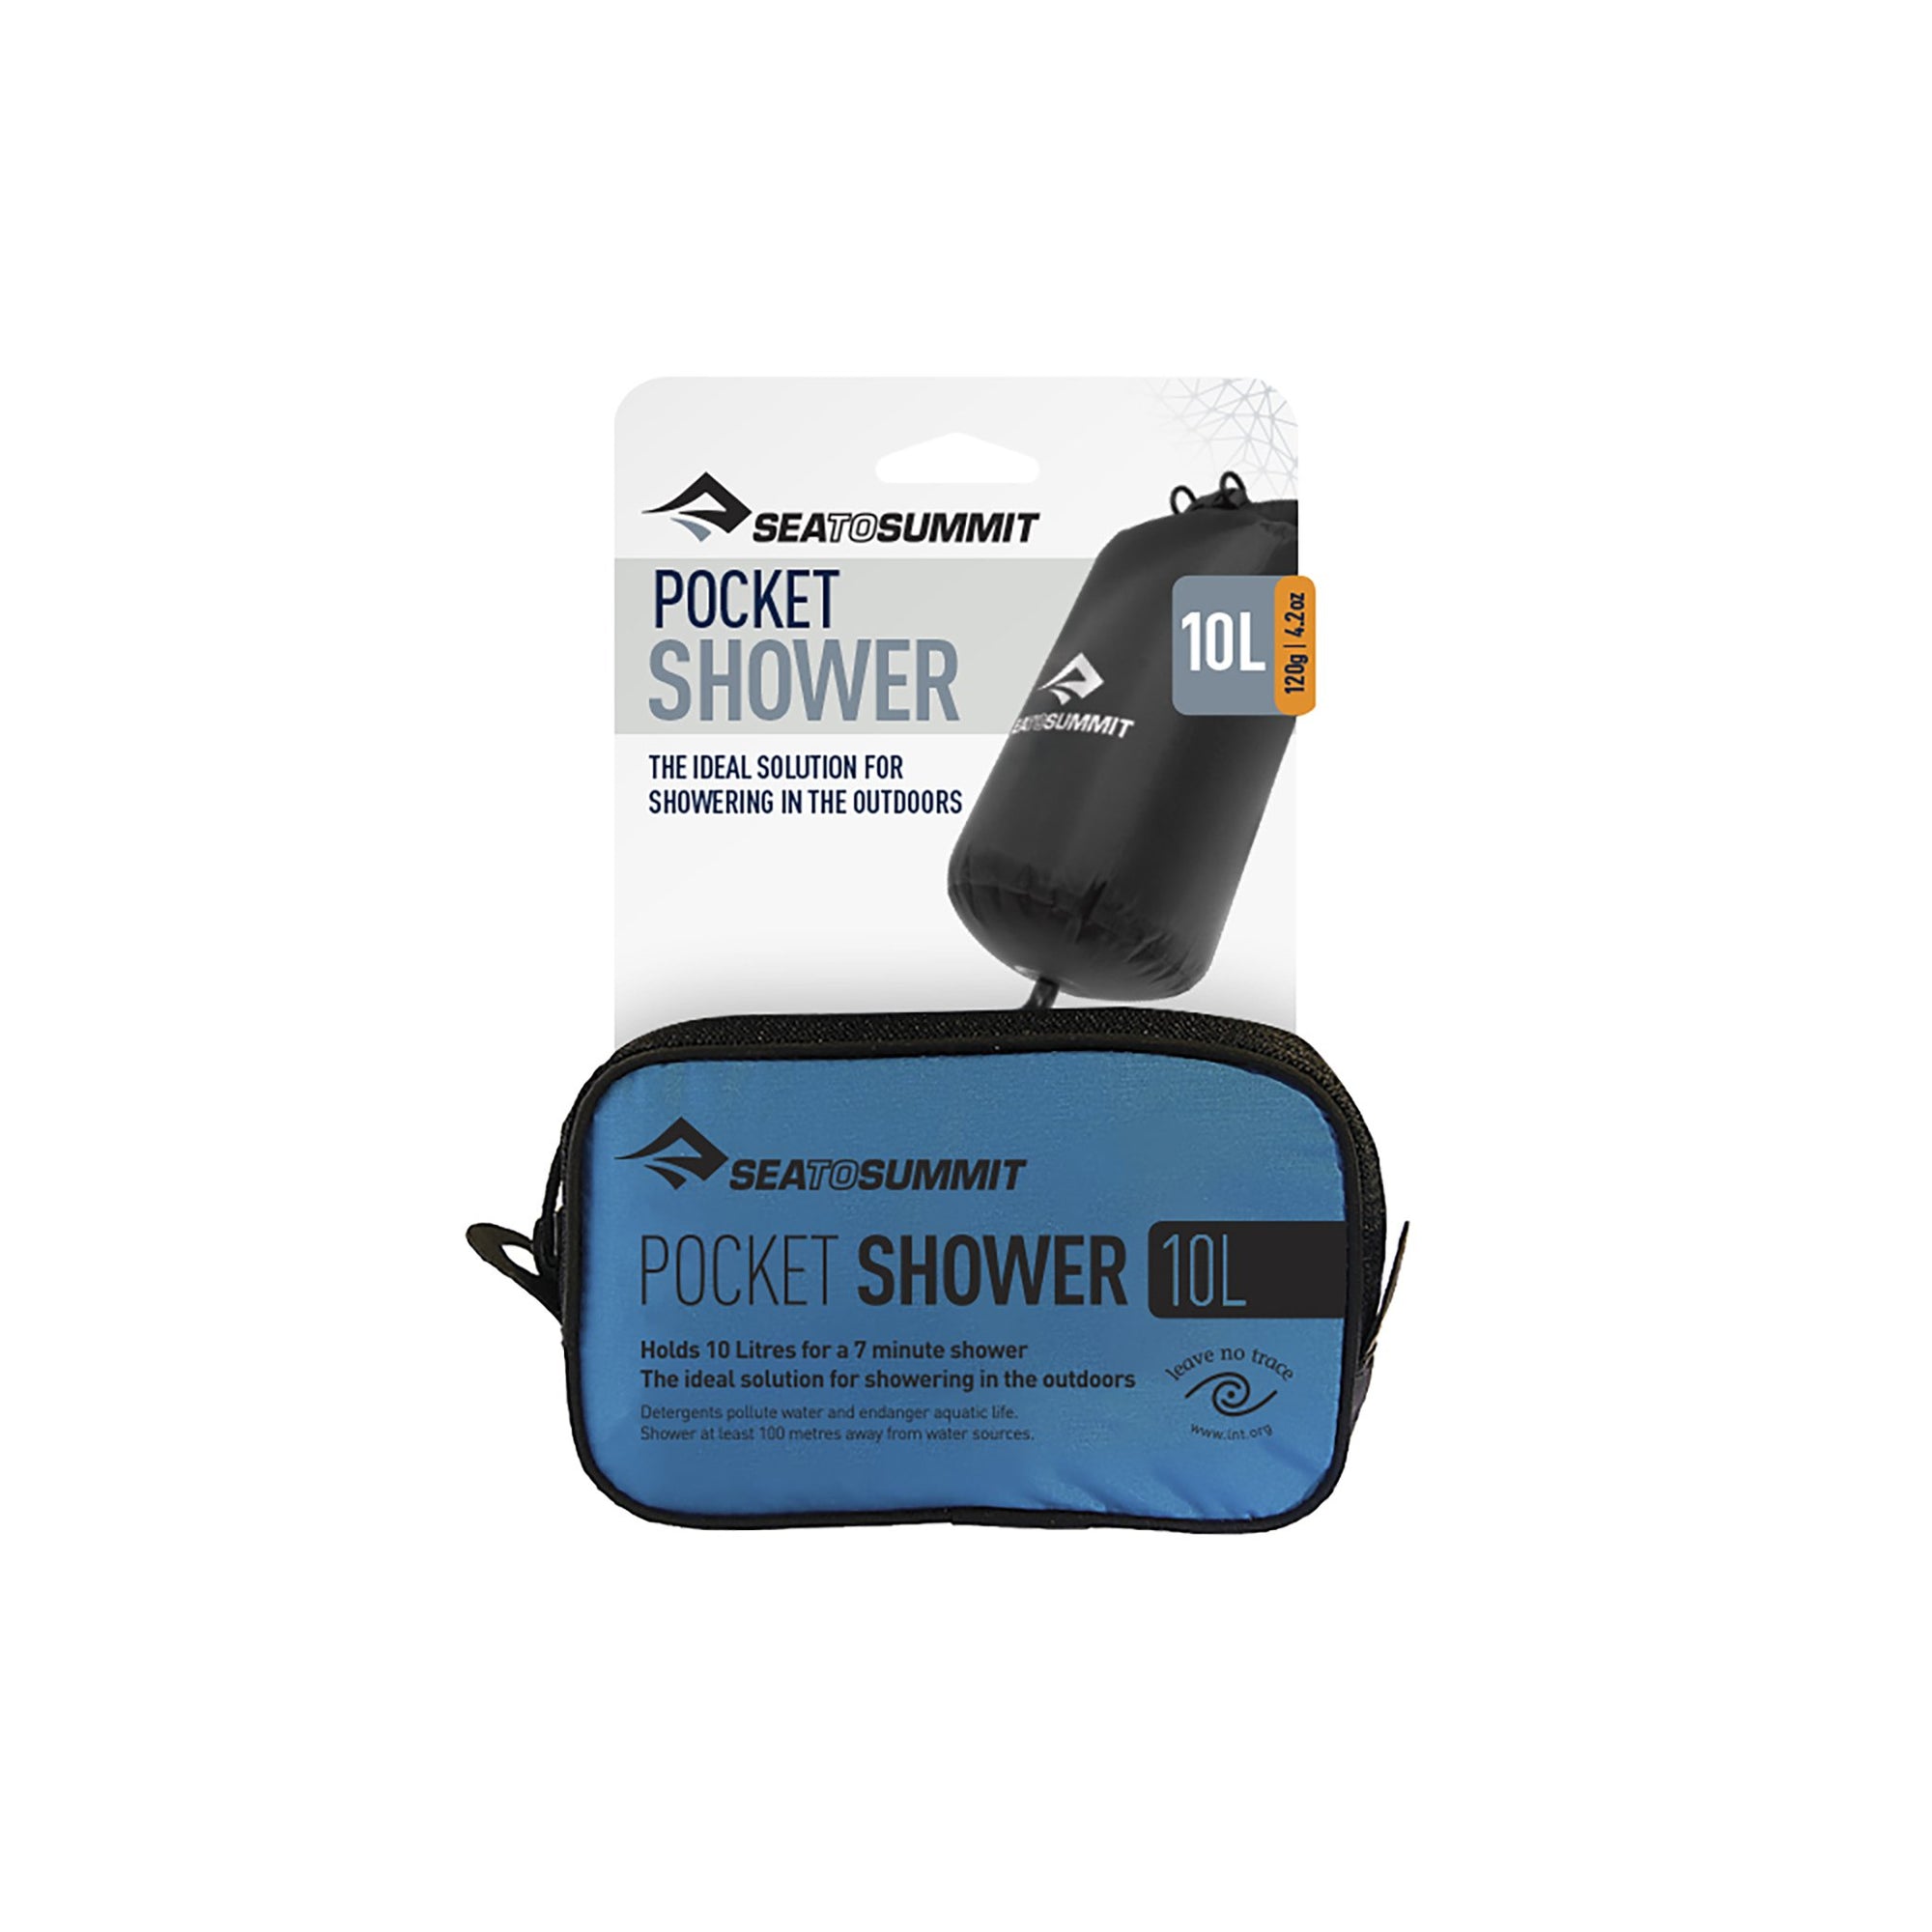 Sea To Summit Pocket Shower in black showing nozzle